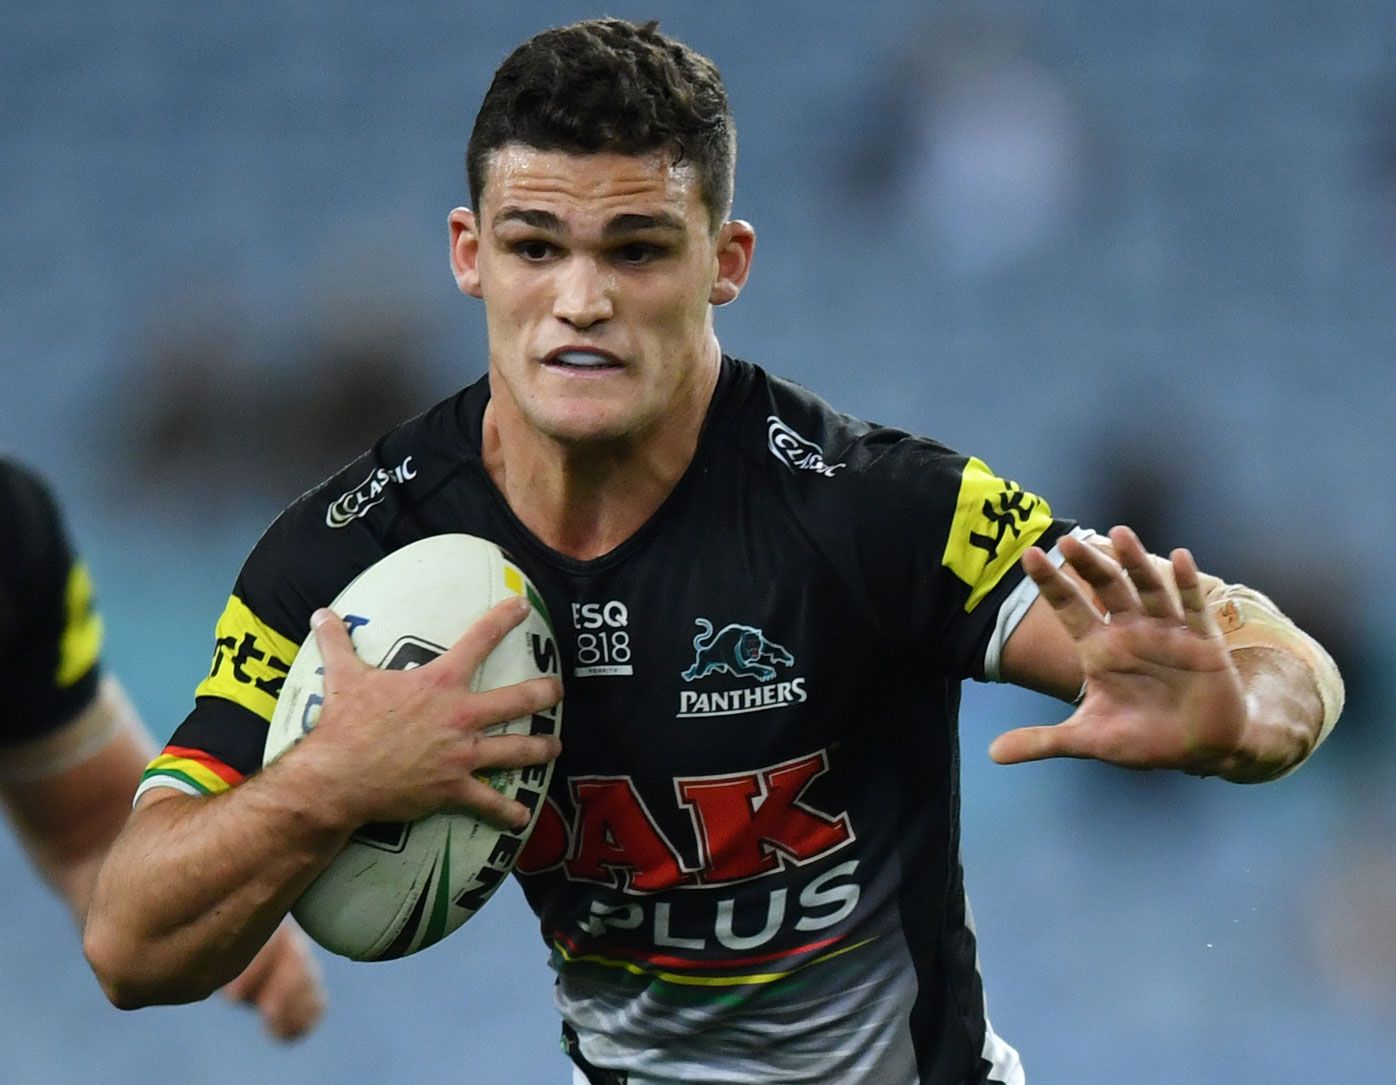 Blues coach Brad Fittler sends warning to Cleary, Maloney over 'terrible' Penrith attack